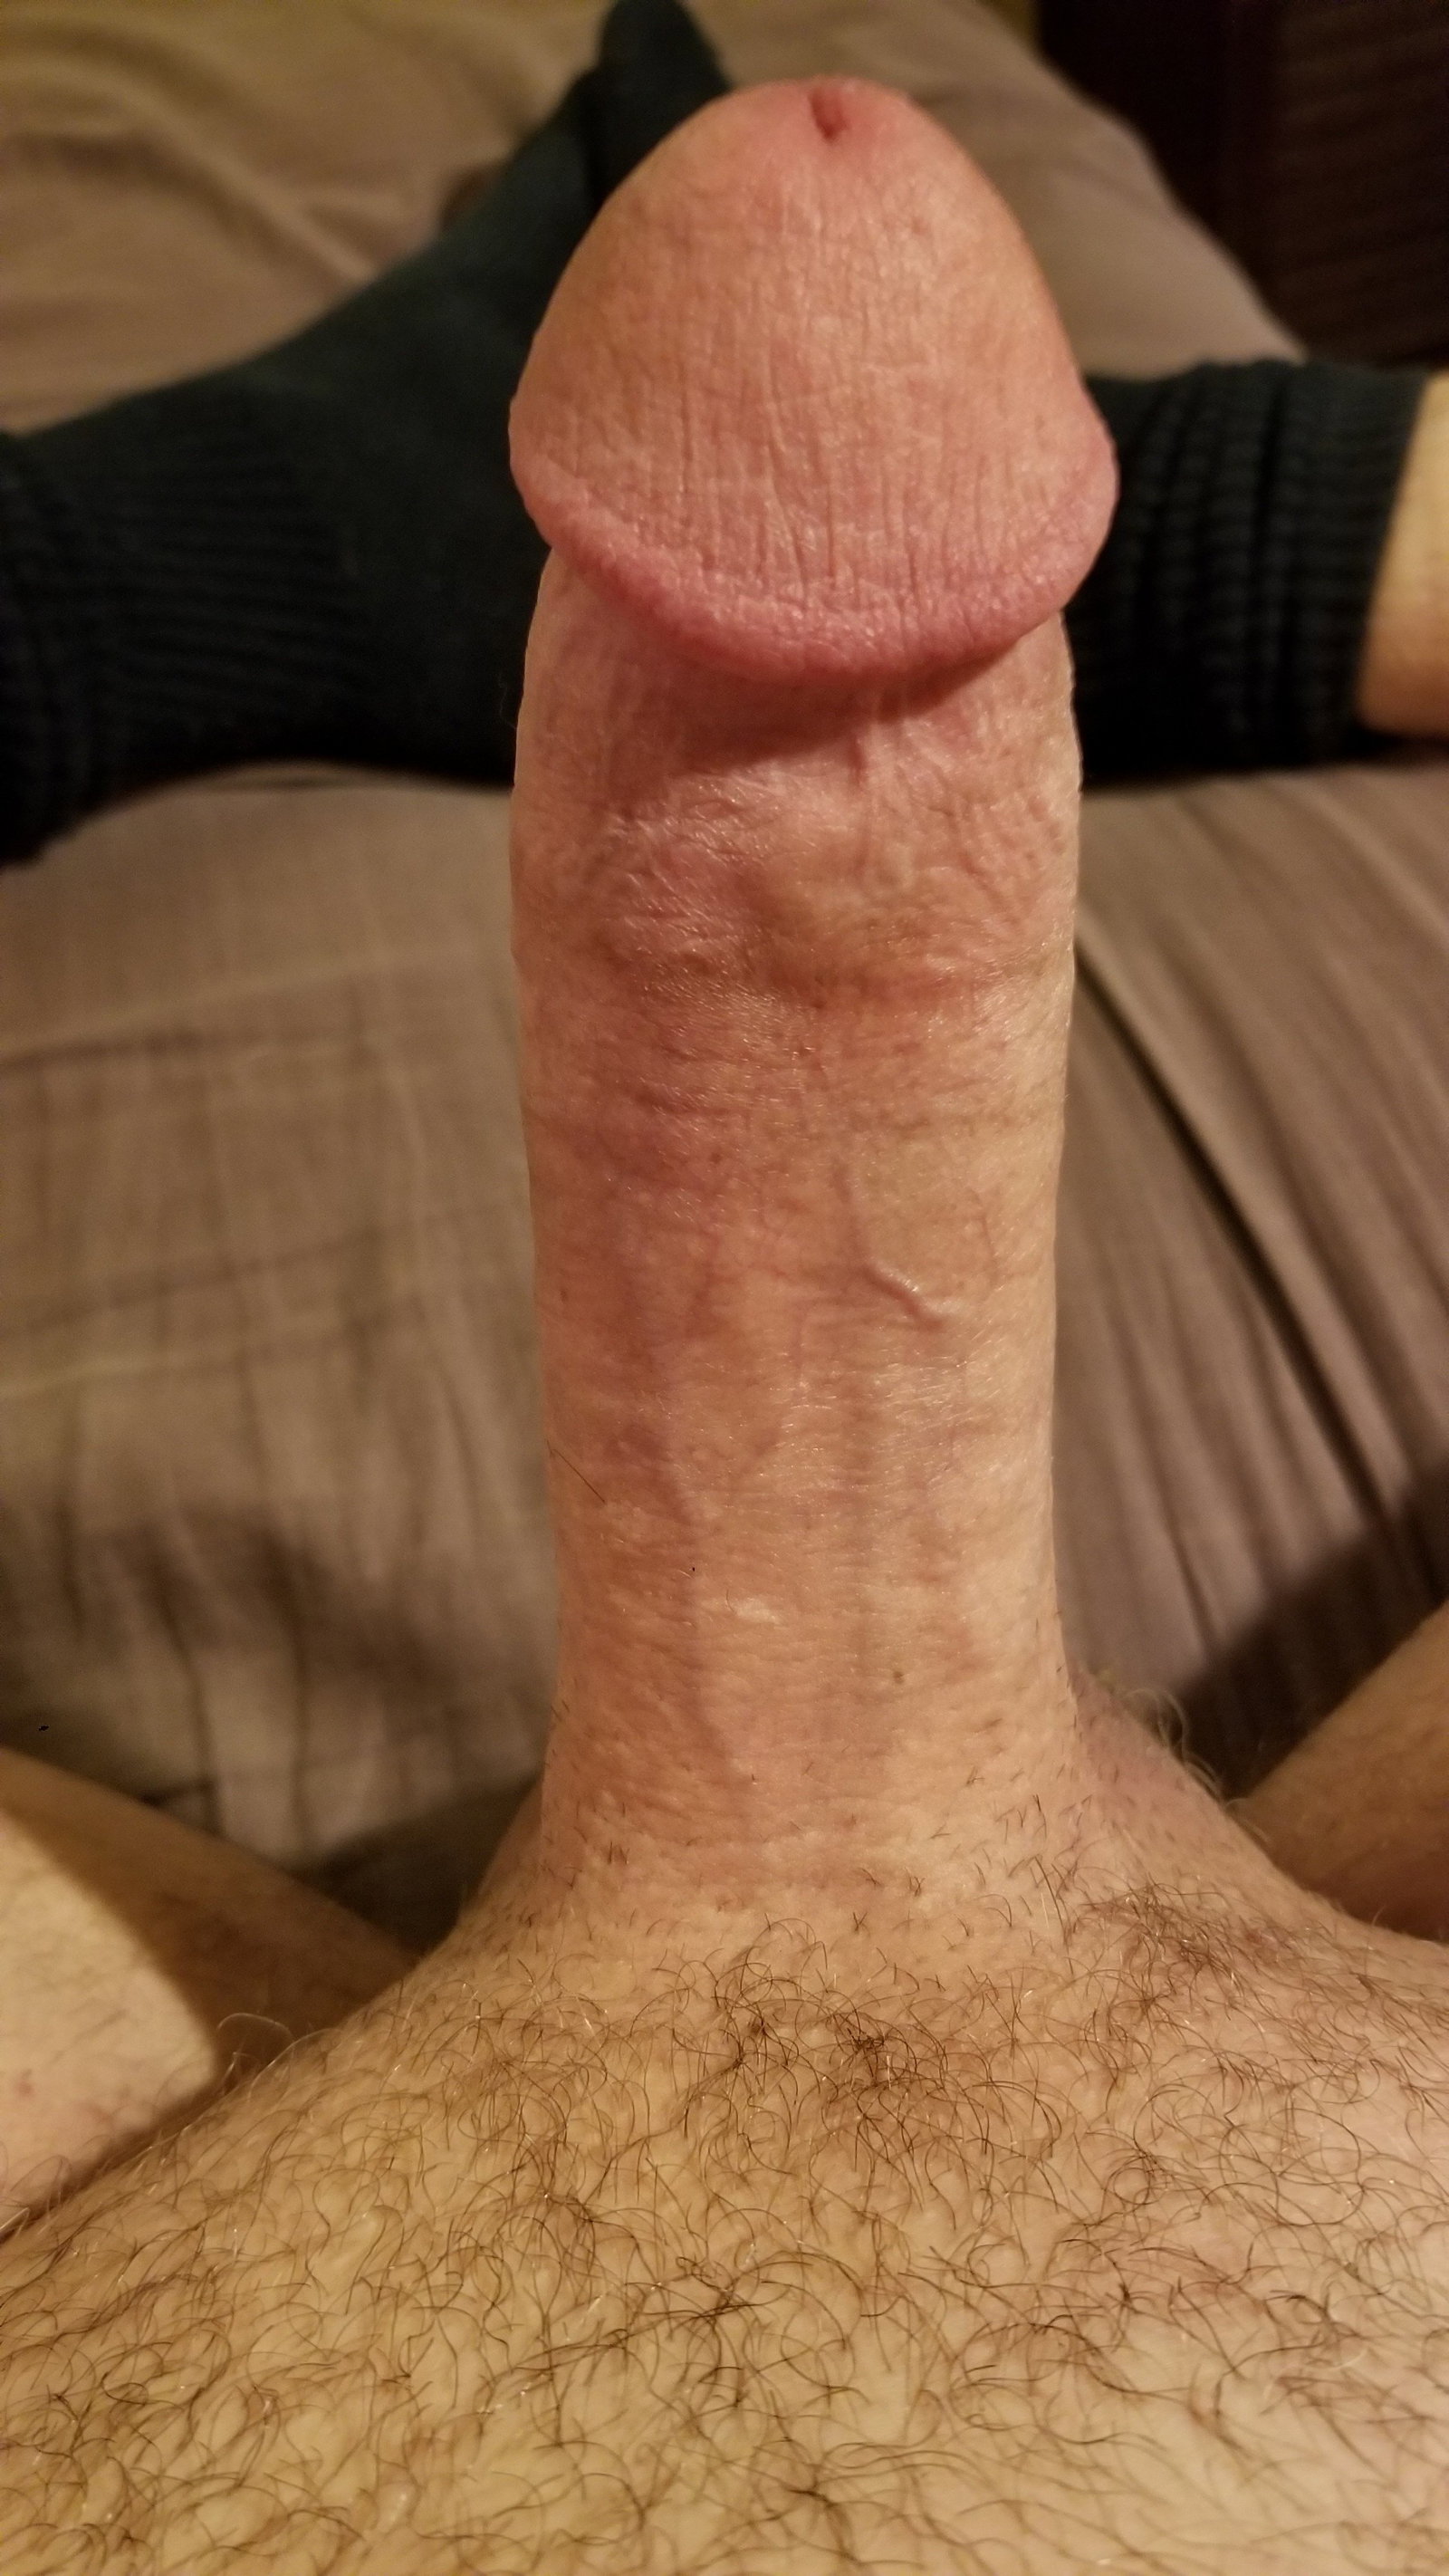 Photo by T.Davis8 with the username @T.Davis8, who is a verified user,  March 19, 2024 at 4:29 AM. The post is about the topic Big dicks and the text says 'My big dick and black socks! 😈'